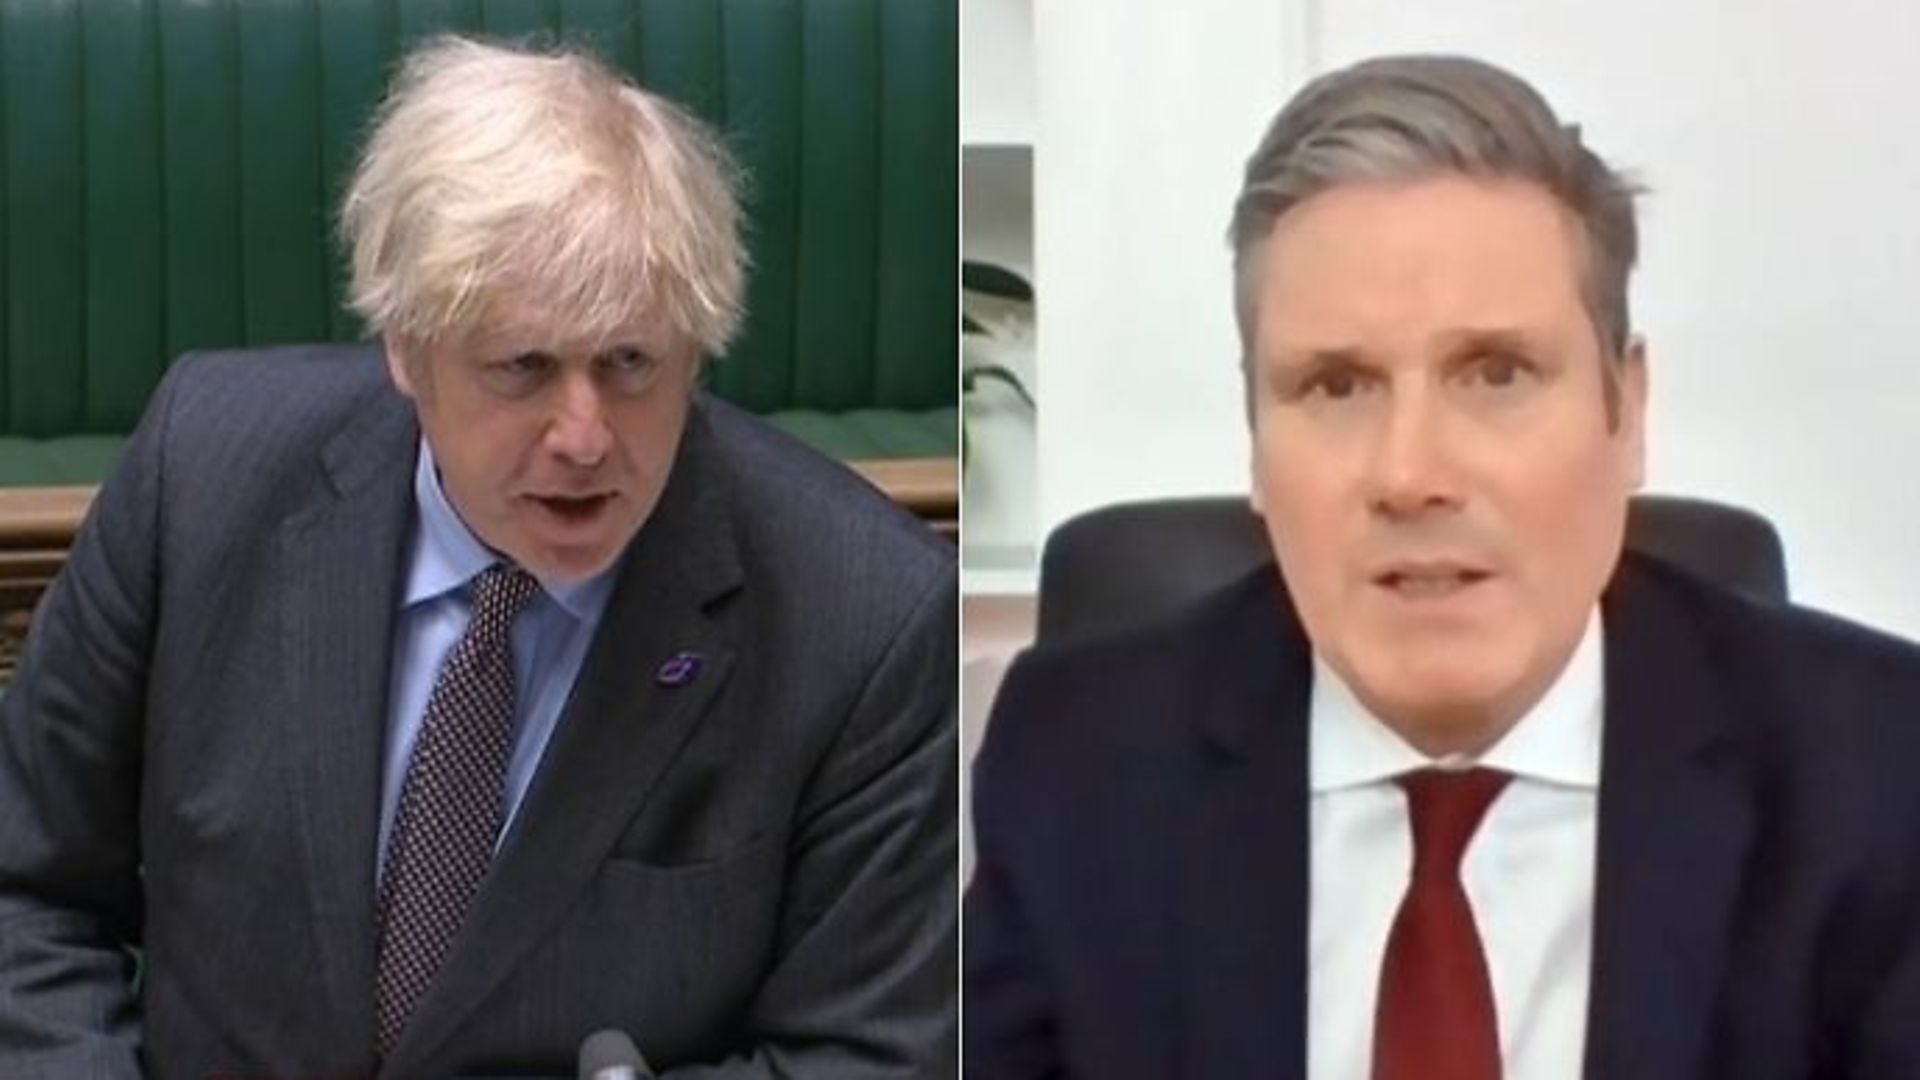 Boris Johnson (L) and Keir Starmer during Prime Minister's Questions - Credit: Parliamentlive.tv